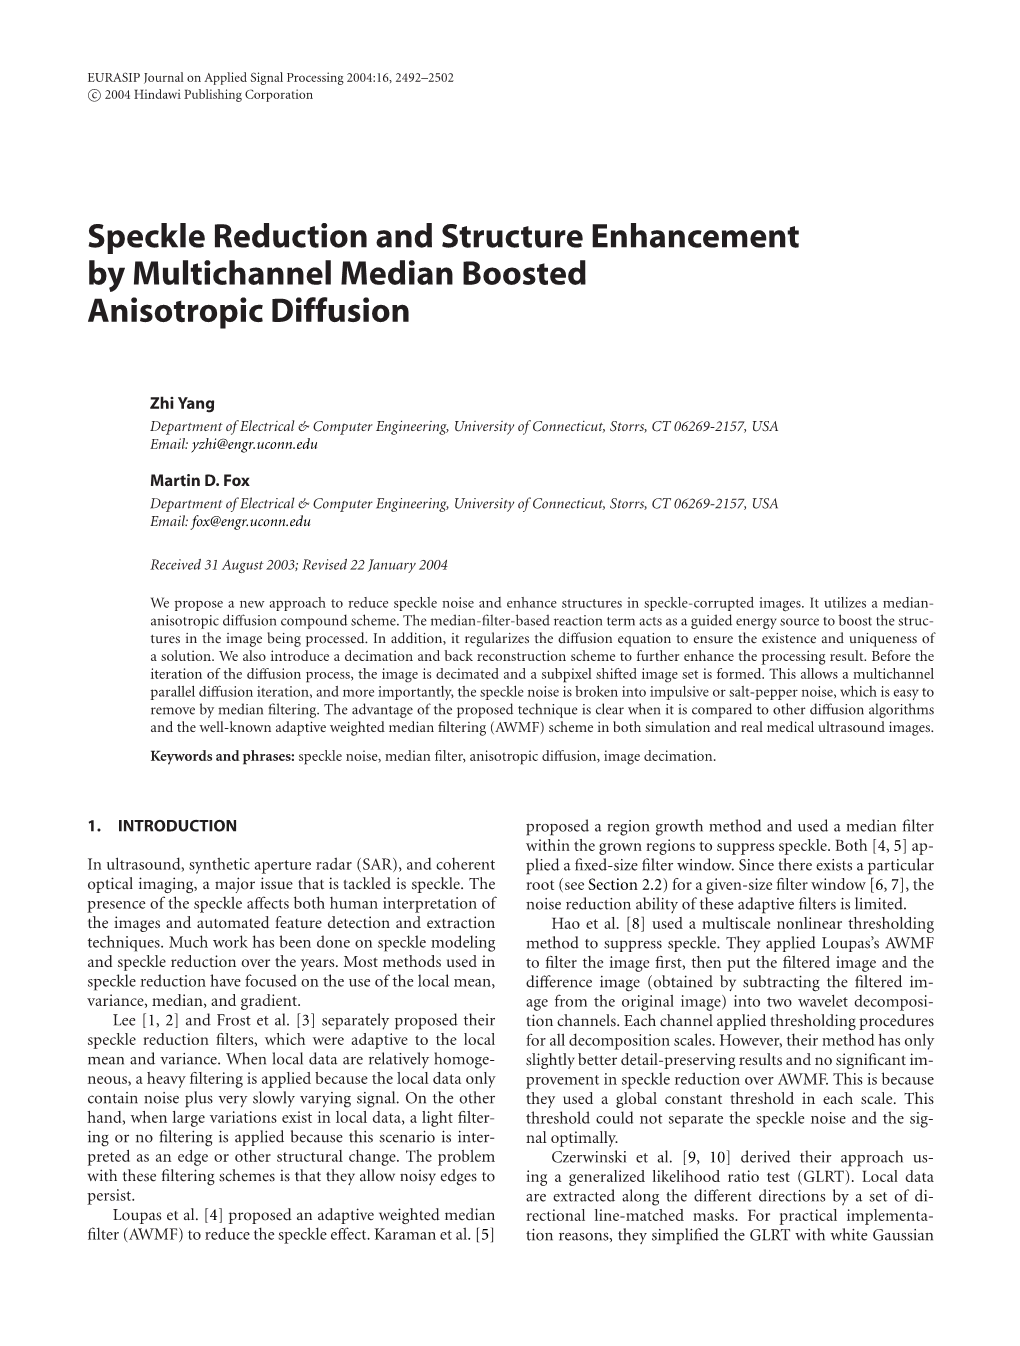 Speckle Reduction and Structure Enhancement by Multichannel Median Boosted Anisotropic Diffusion